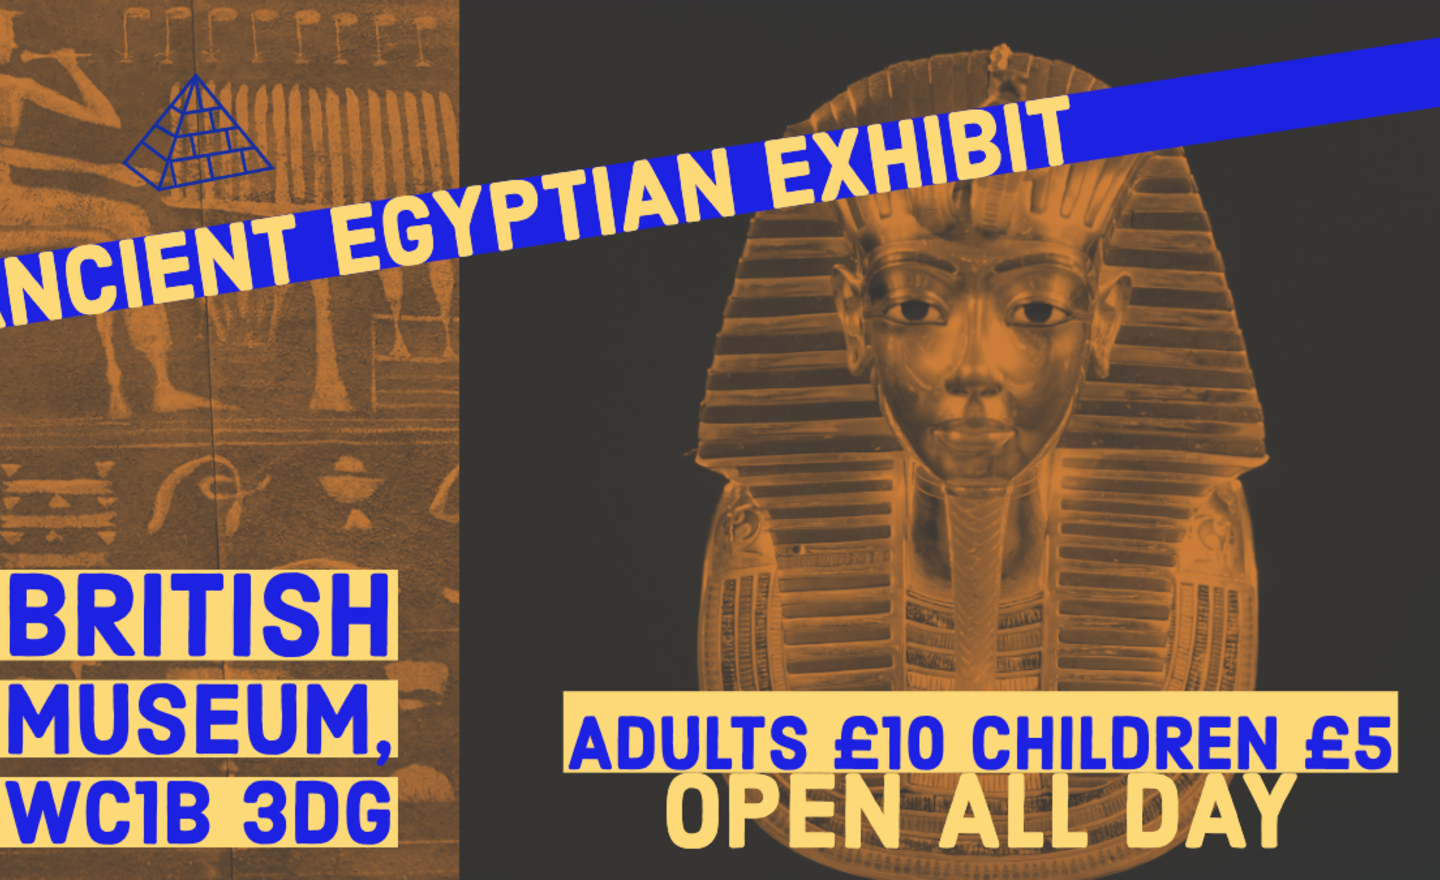 Image of Egyptian Exhibition Posters